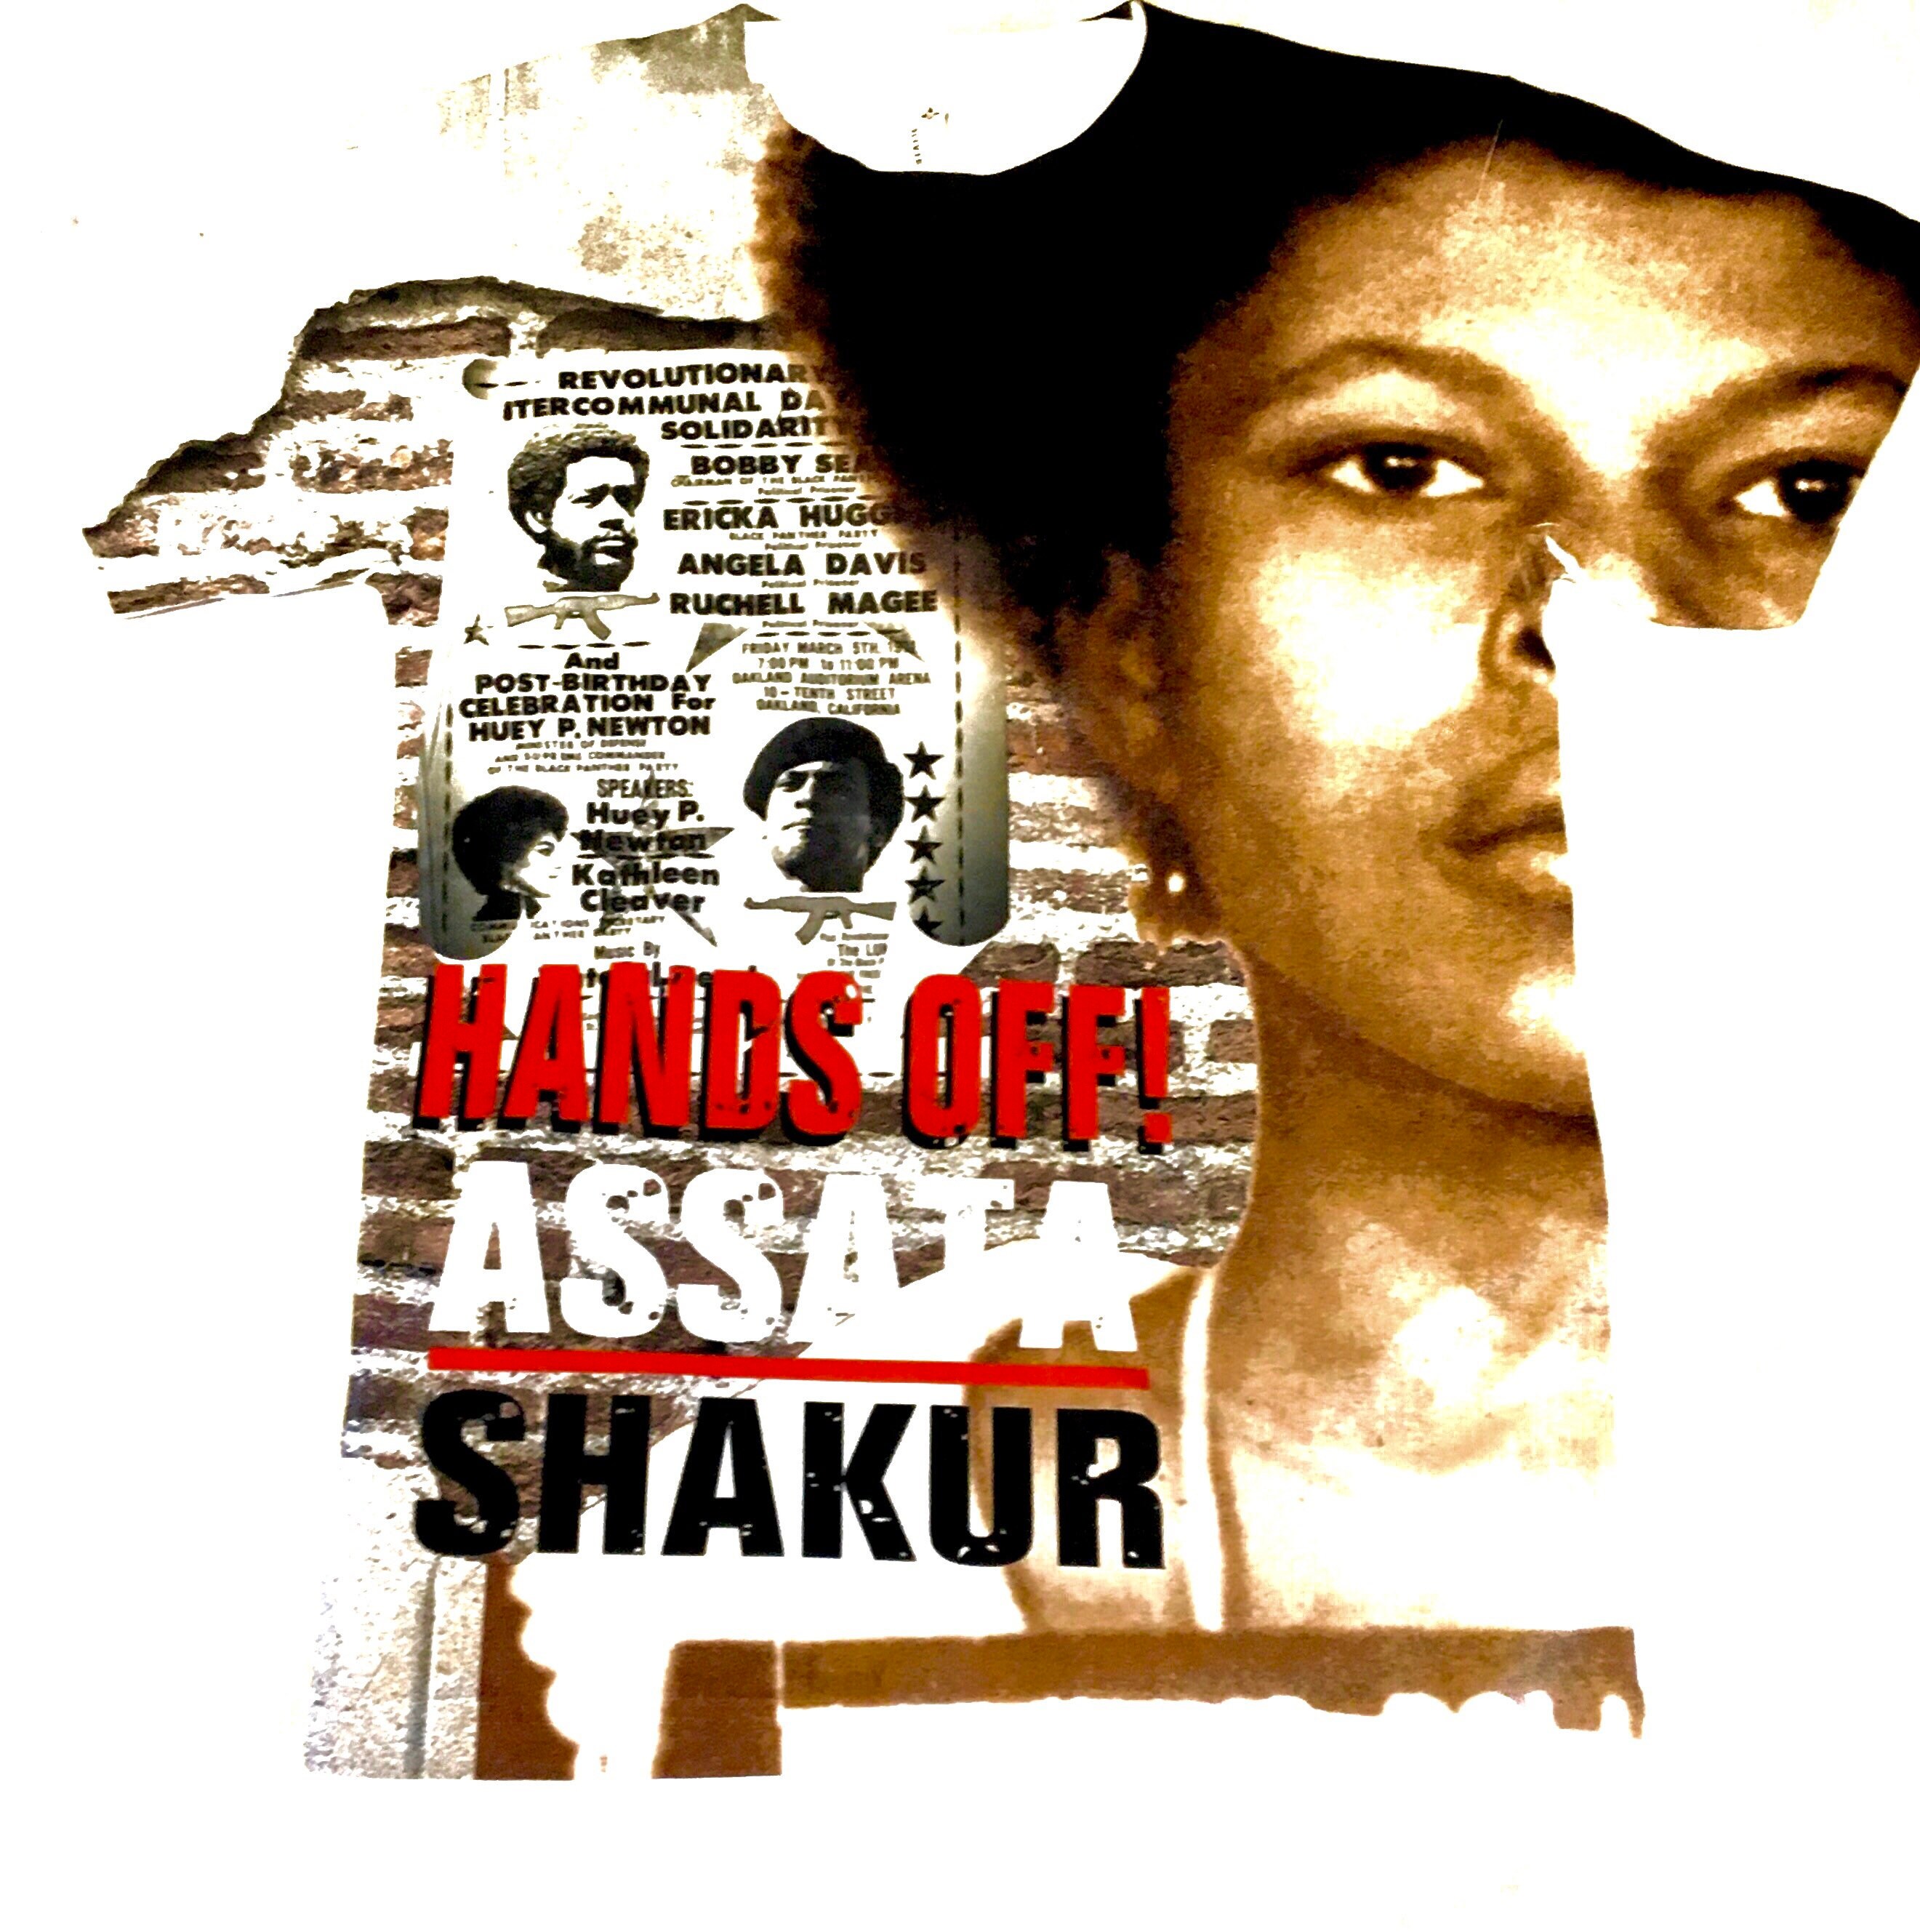 Assata Shakur - Black Panther Party Houston Astros - Baseball Jersey –  Civilly Righteous Clothing